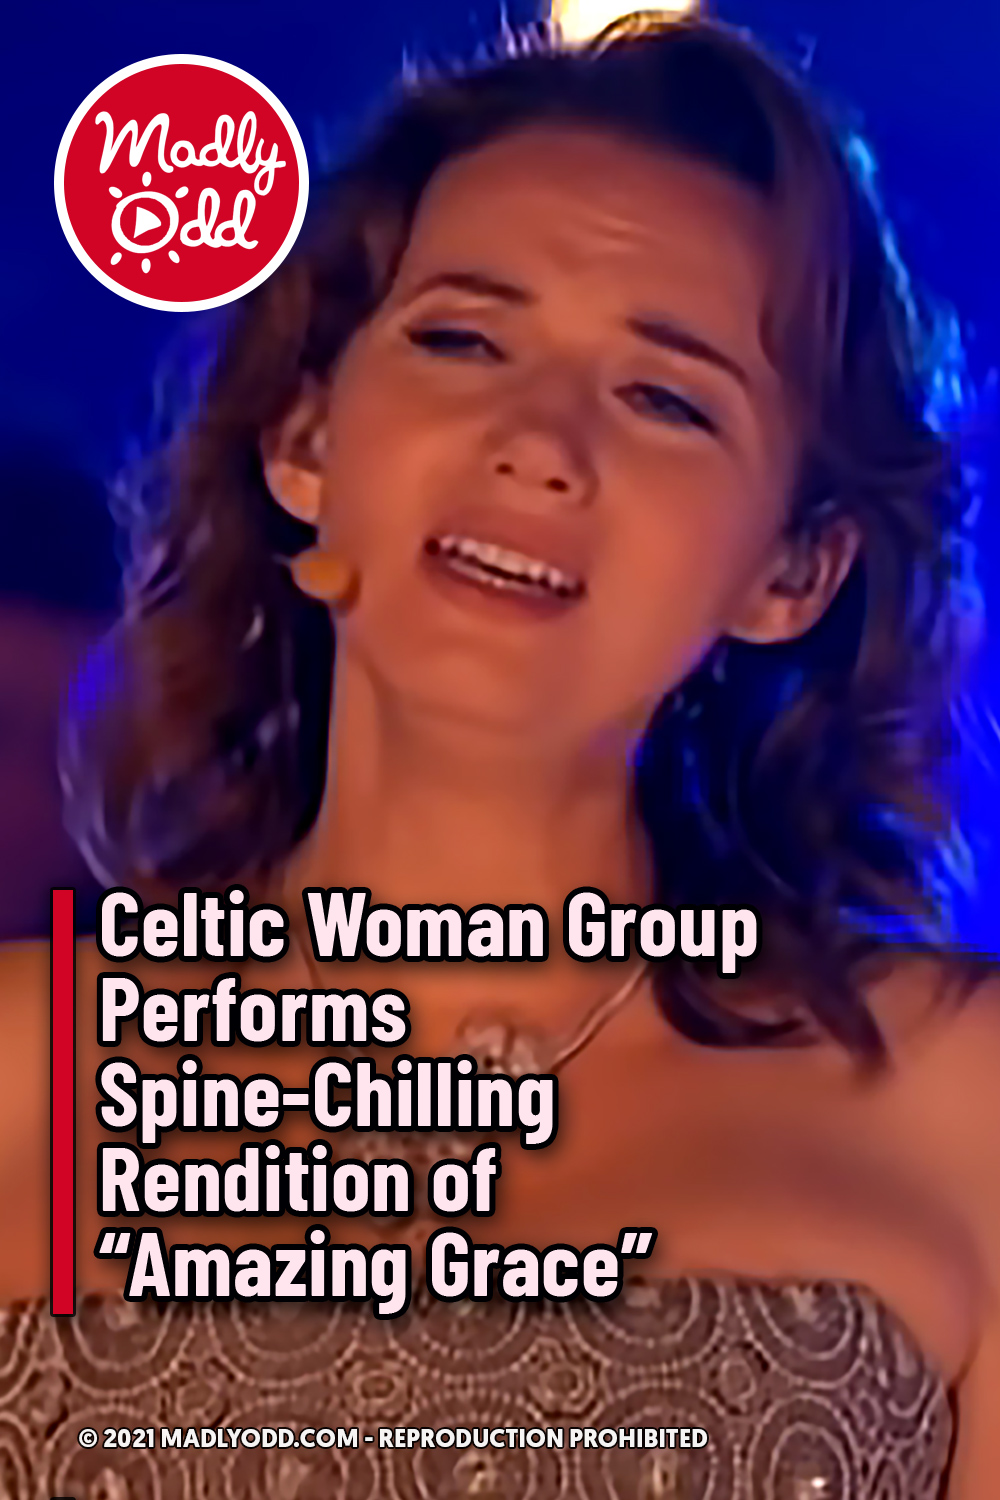 Celtic Woman Group Performs Spine-Chilling Rendition of “Amazing Grace”